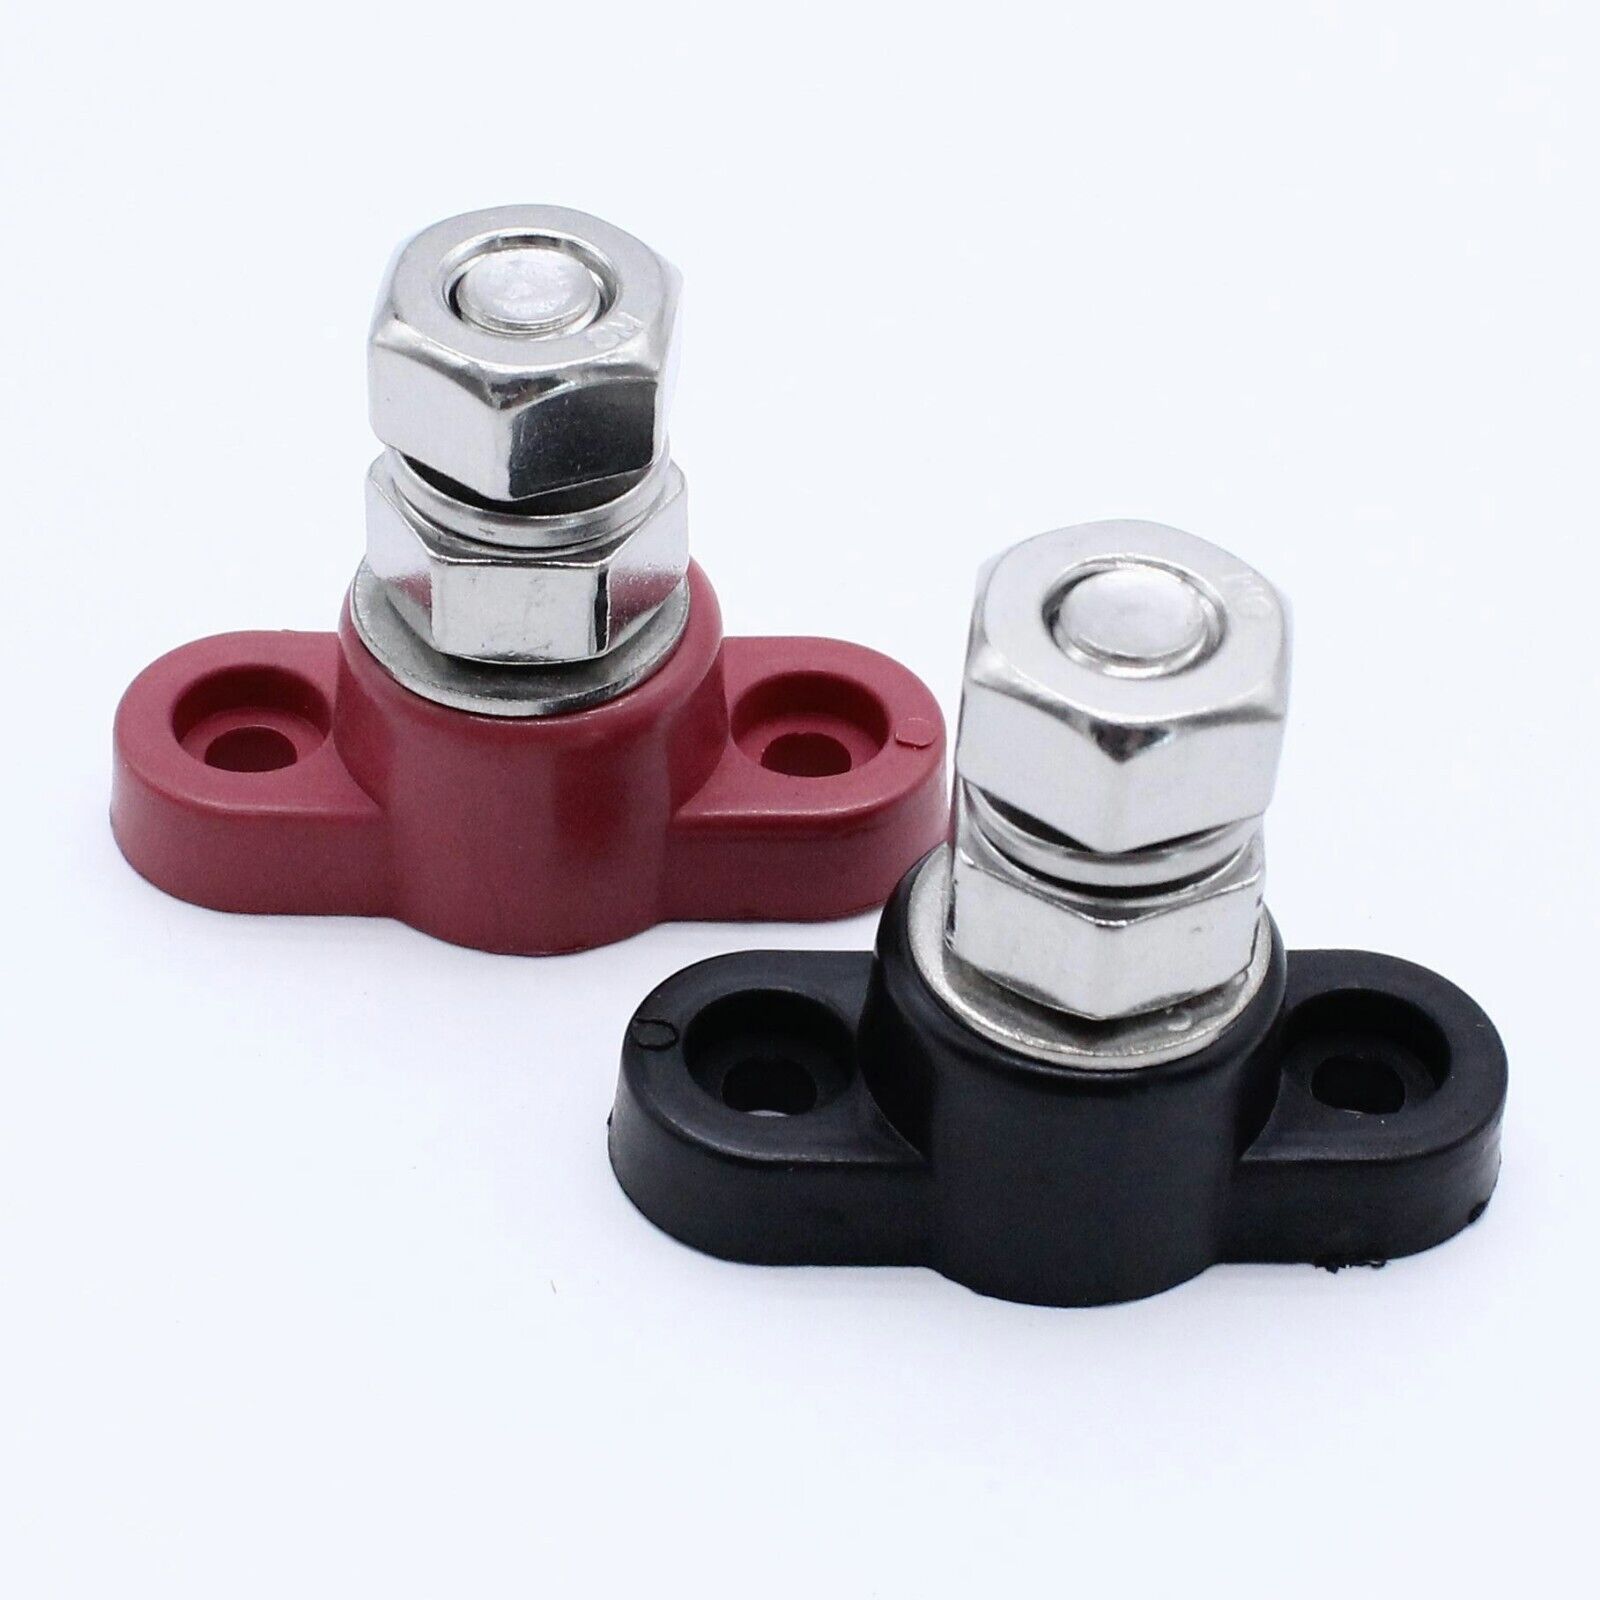 Red & Black Junction Block Power Post Set Insulated Terminal Stud 3/8\